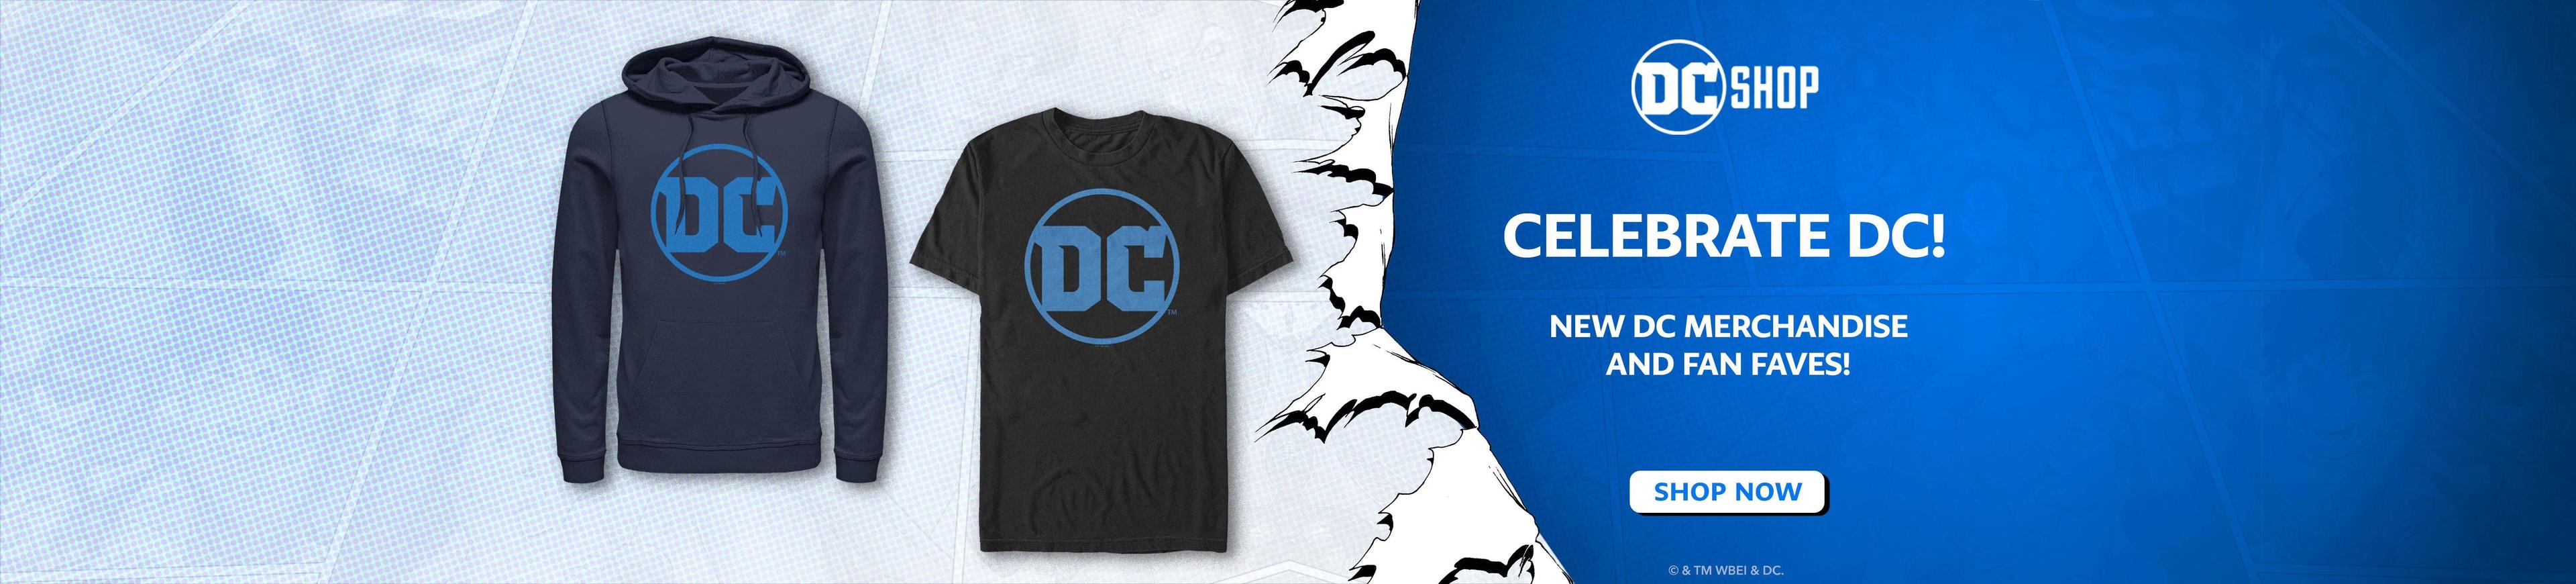 DC Shop Celebrate DC new DC Merchandise and Fan Faves!